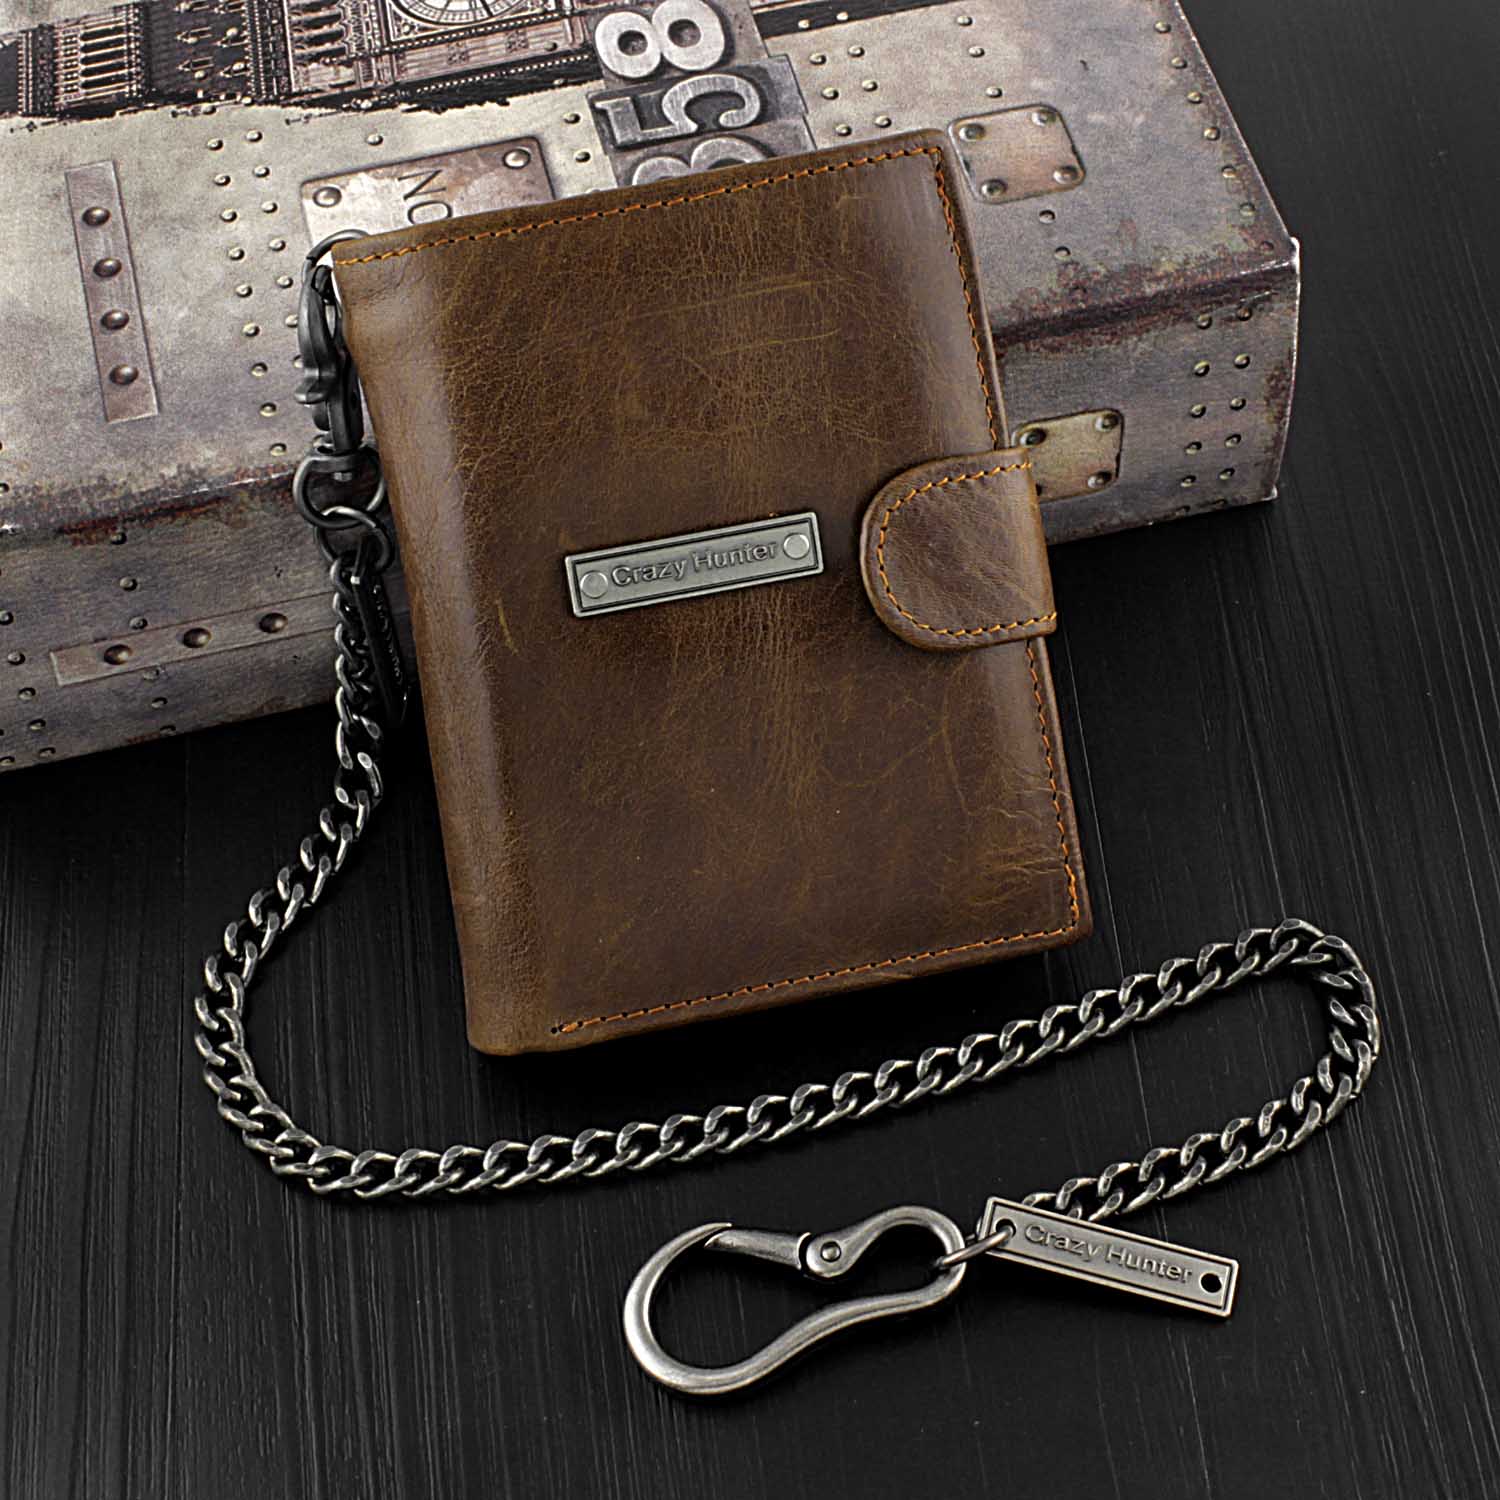 Mens Leather Bifold Wallet Double Zipper Coin Pocket with Anti-Theft Chain  Purse | eBay